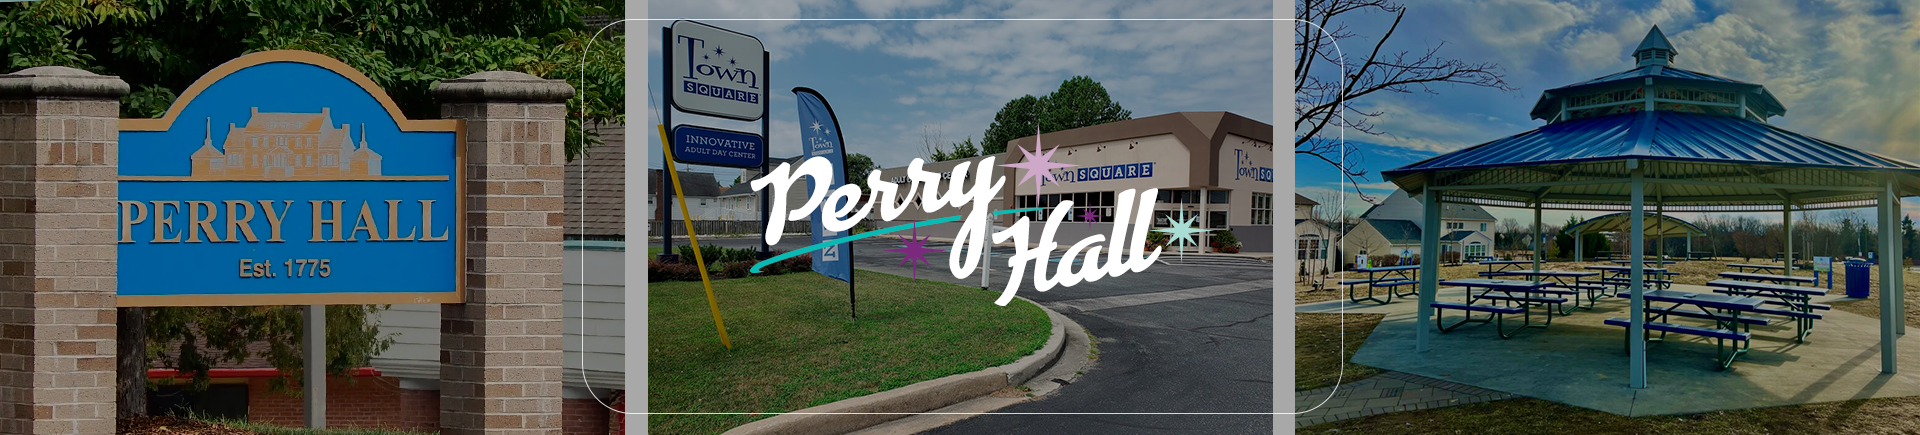 Take an Inside Look at Town Square Perry Hall